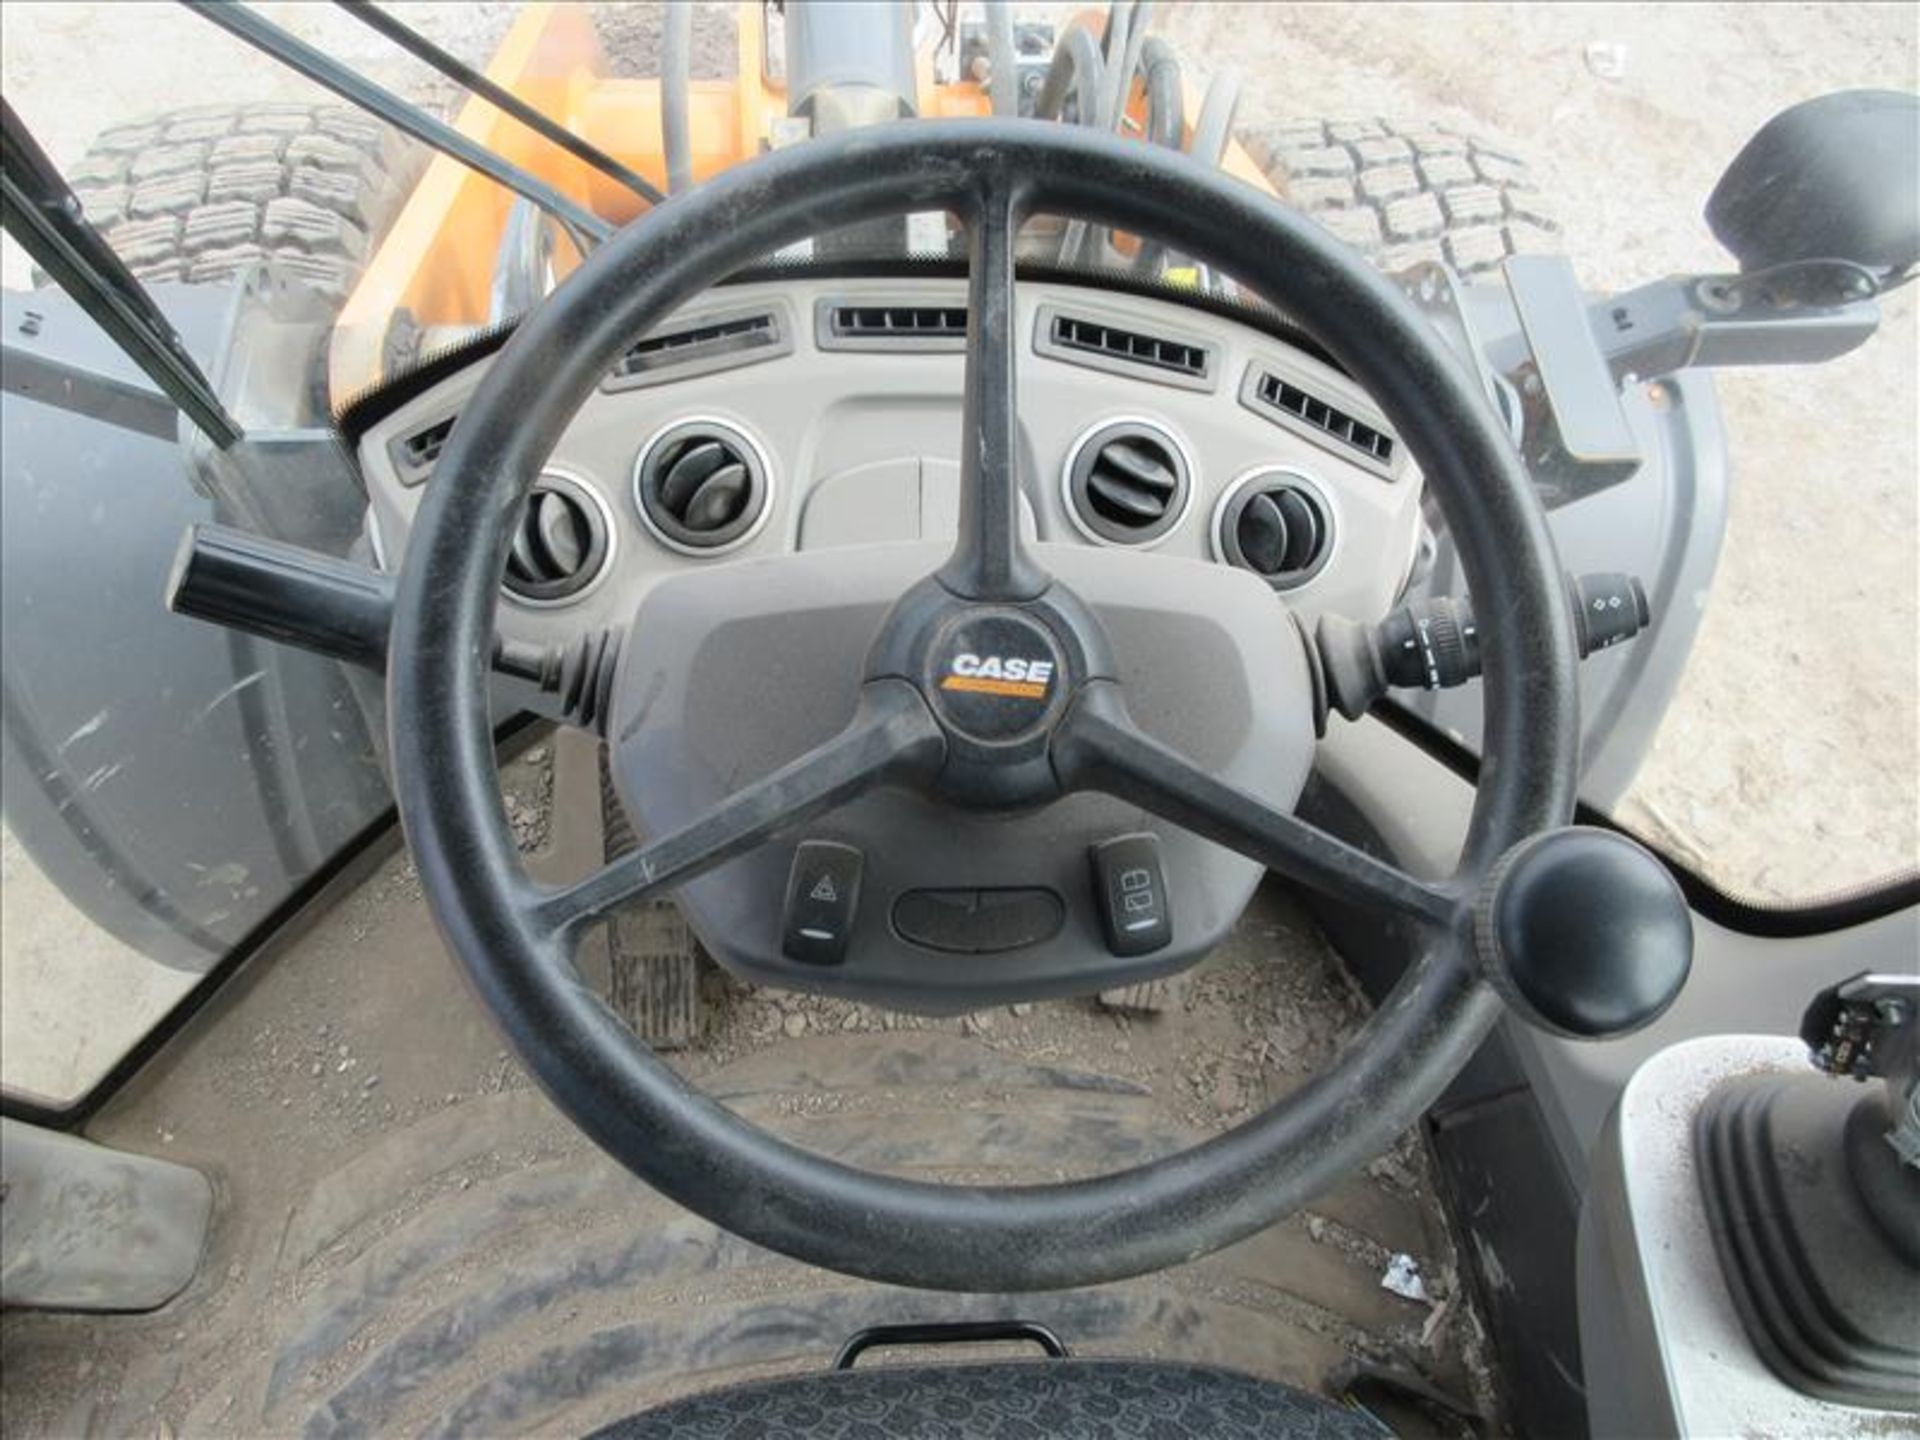 Case 621G Wheel Loader, enclosed cab, auxiliairy hydraulic system, GRYB Q/C, rearview camera, X - Image 10 of 14